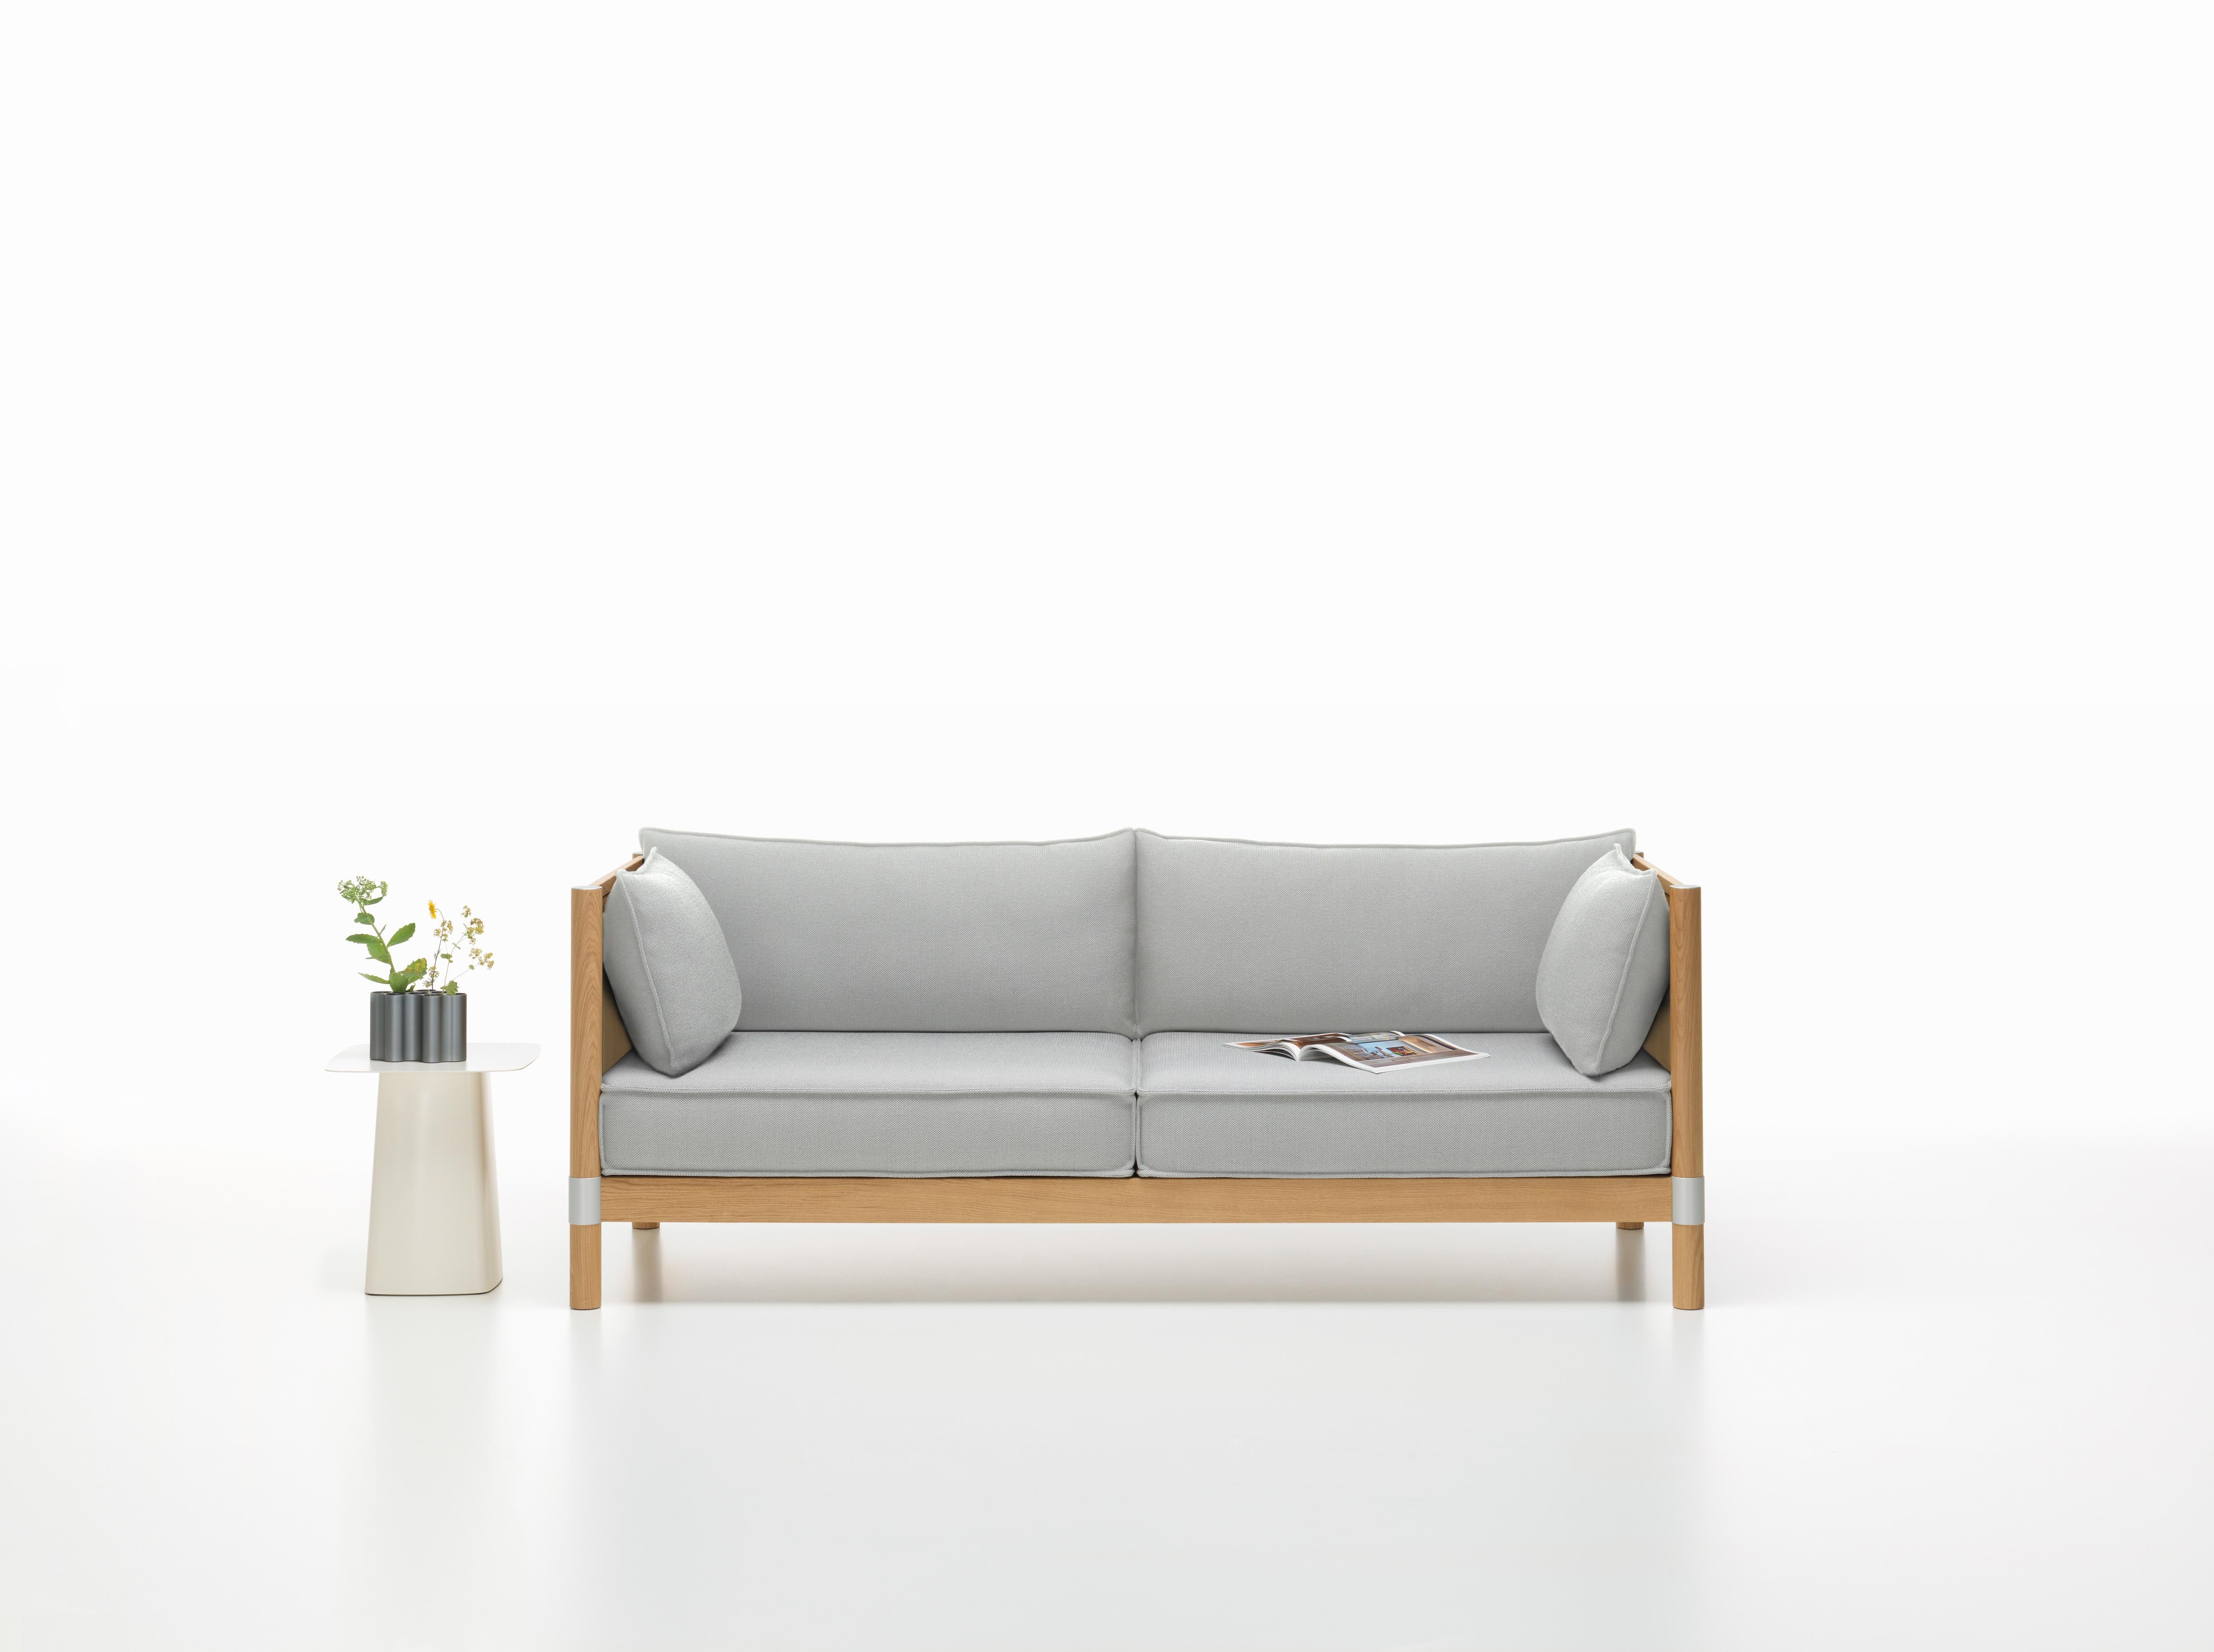 Contemporary Vitra Cyl Wood Sofa in Cream & Sierra Grey Plano by Ronan & Erwan Bouroullec For Sale